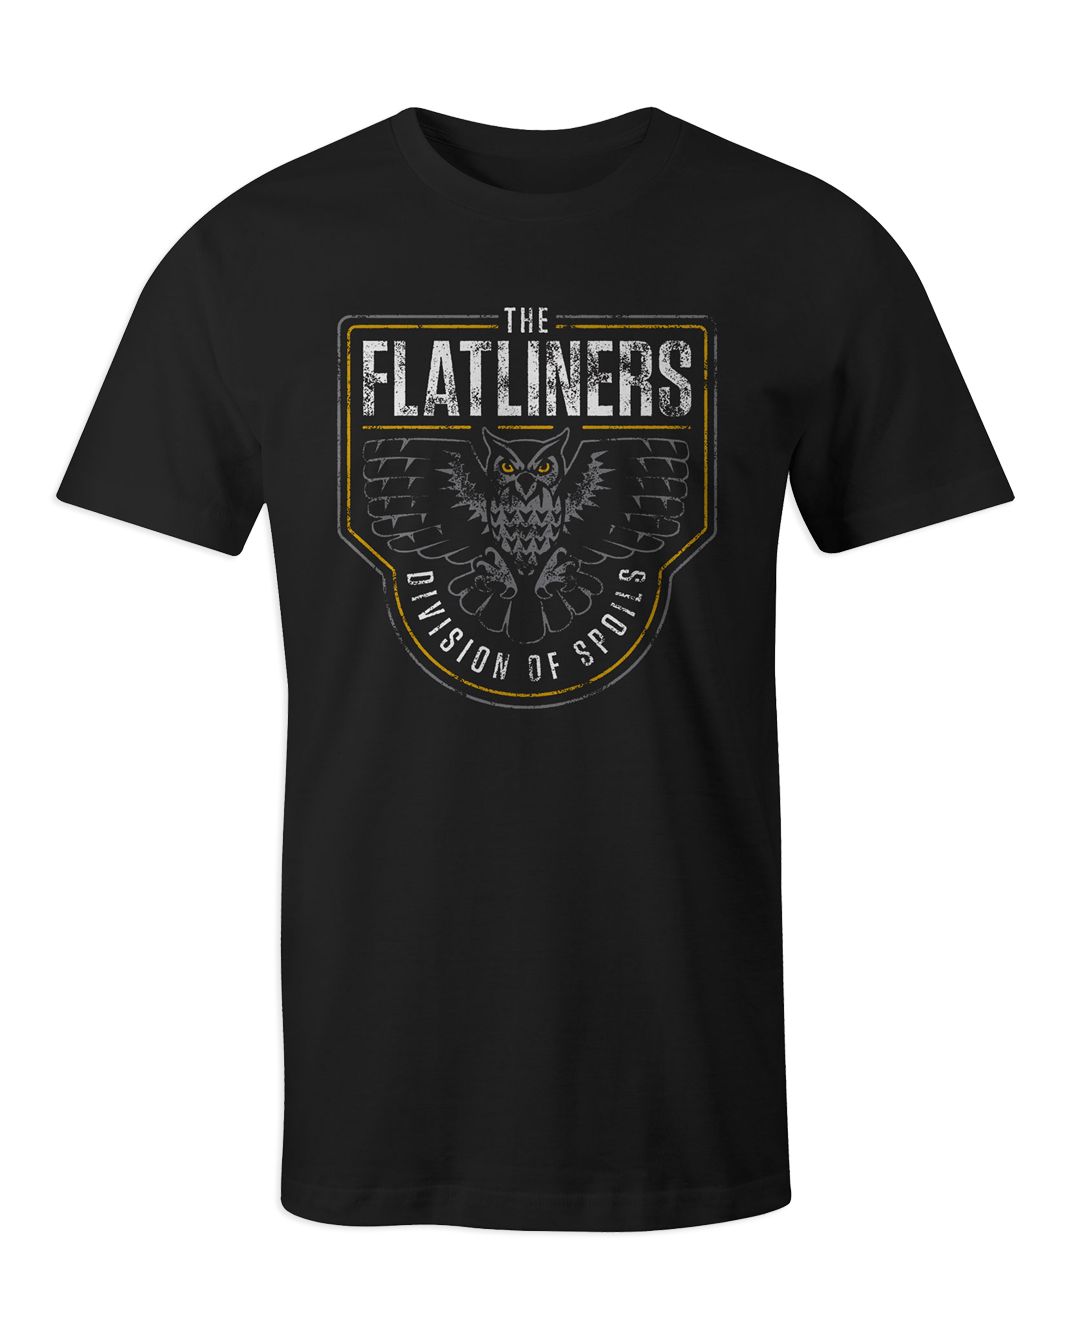 The Flatliners Division of Spoils T-Shirt